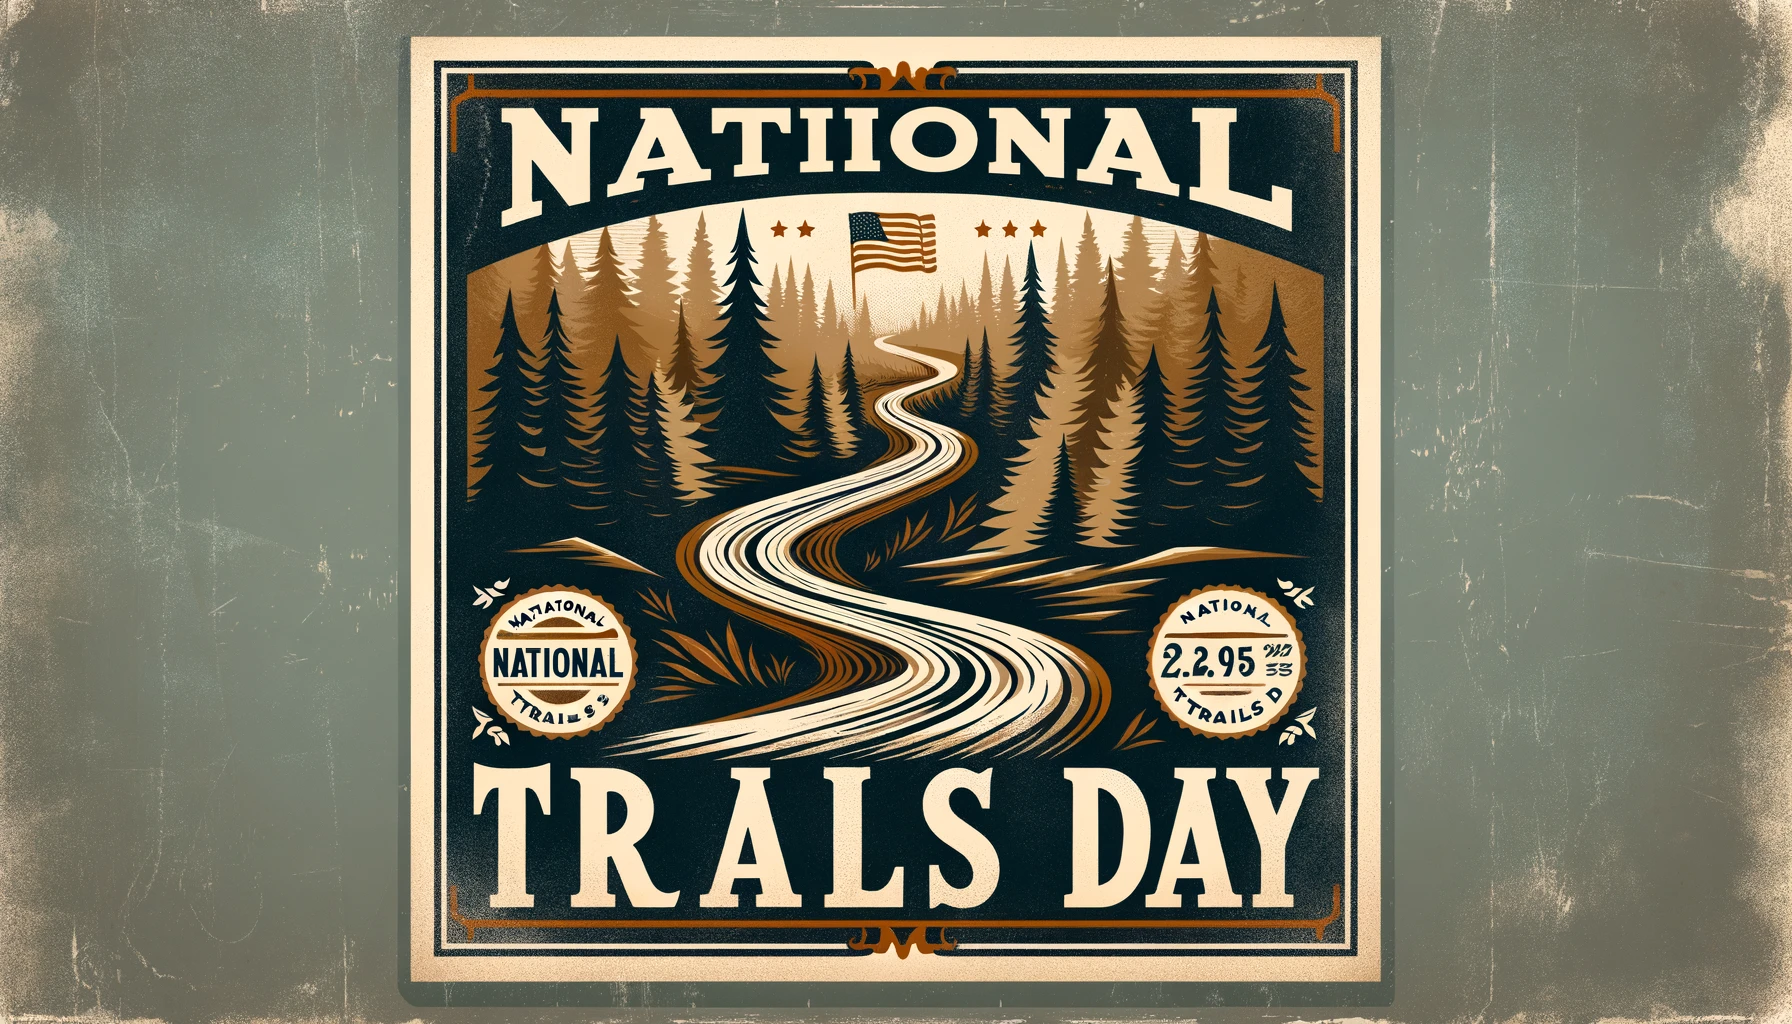 Heartfelt National Trails Day Wishes for Hikers